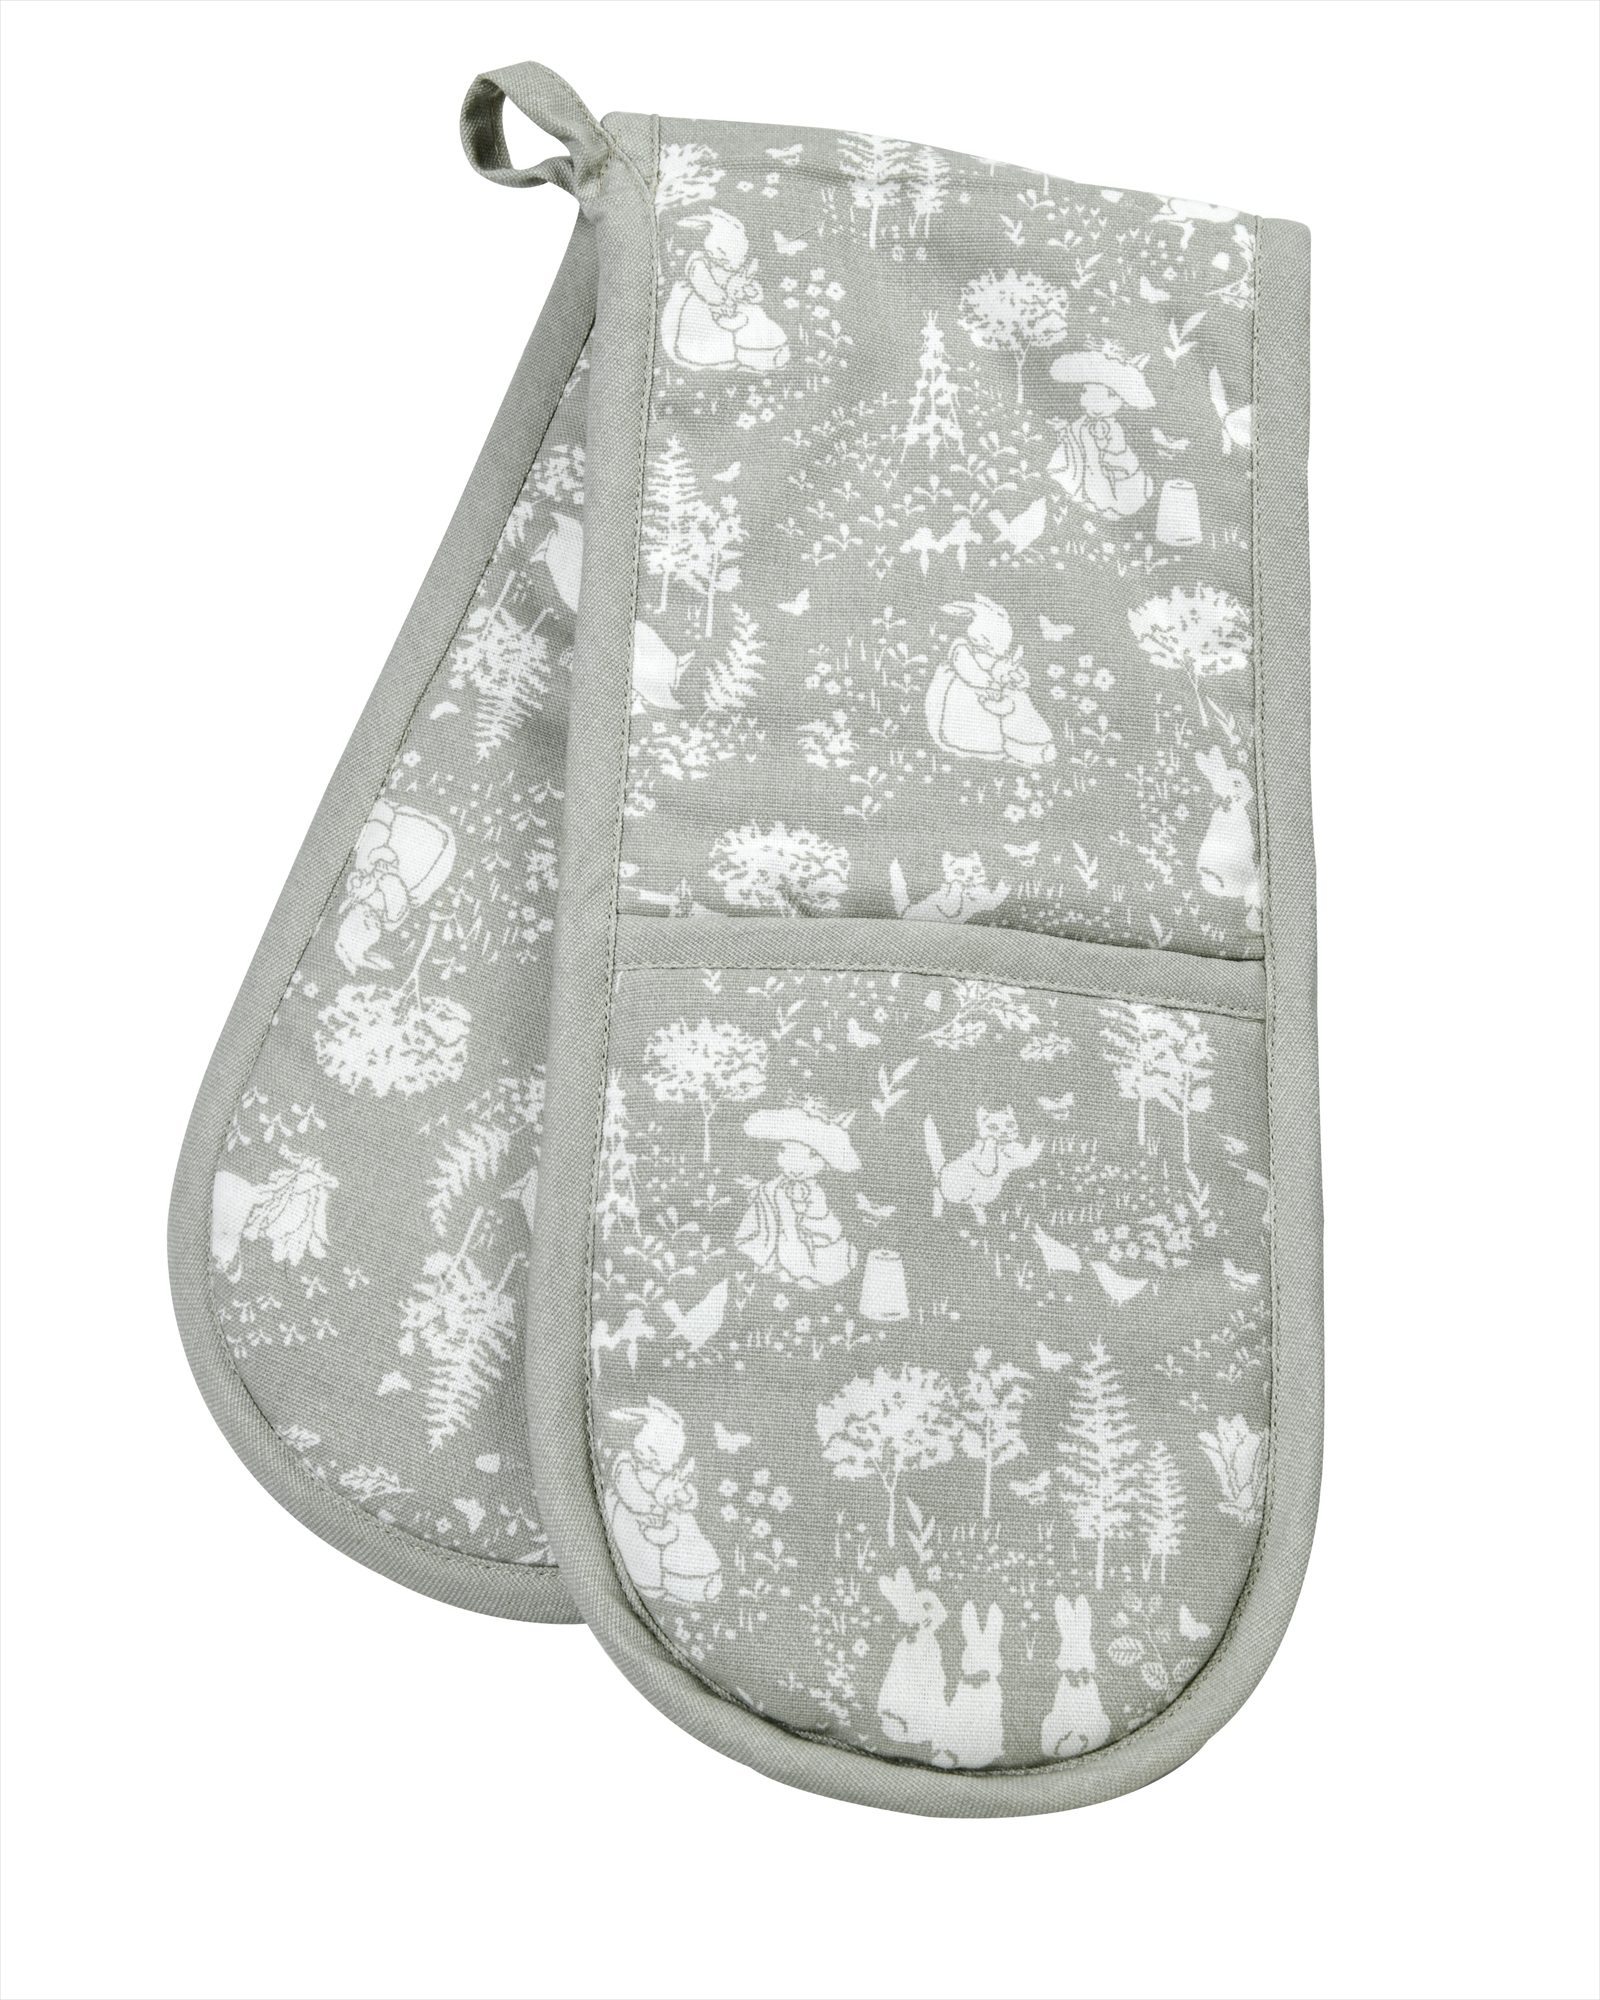 PETER RABBIT CLASSIC GREY PATTERN DOUBLE OVEN GLOVE